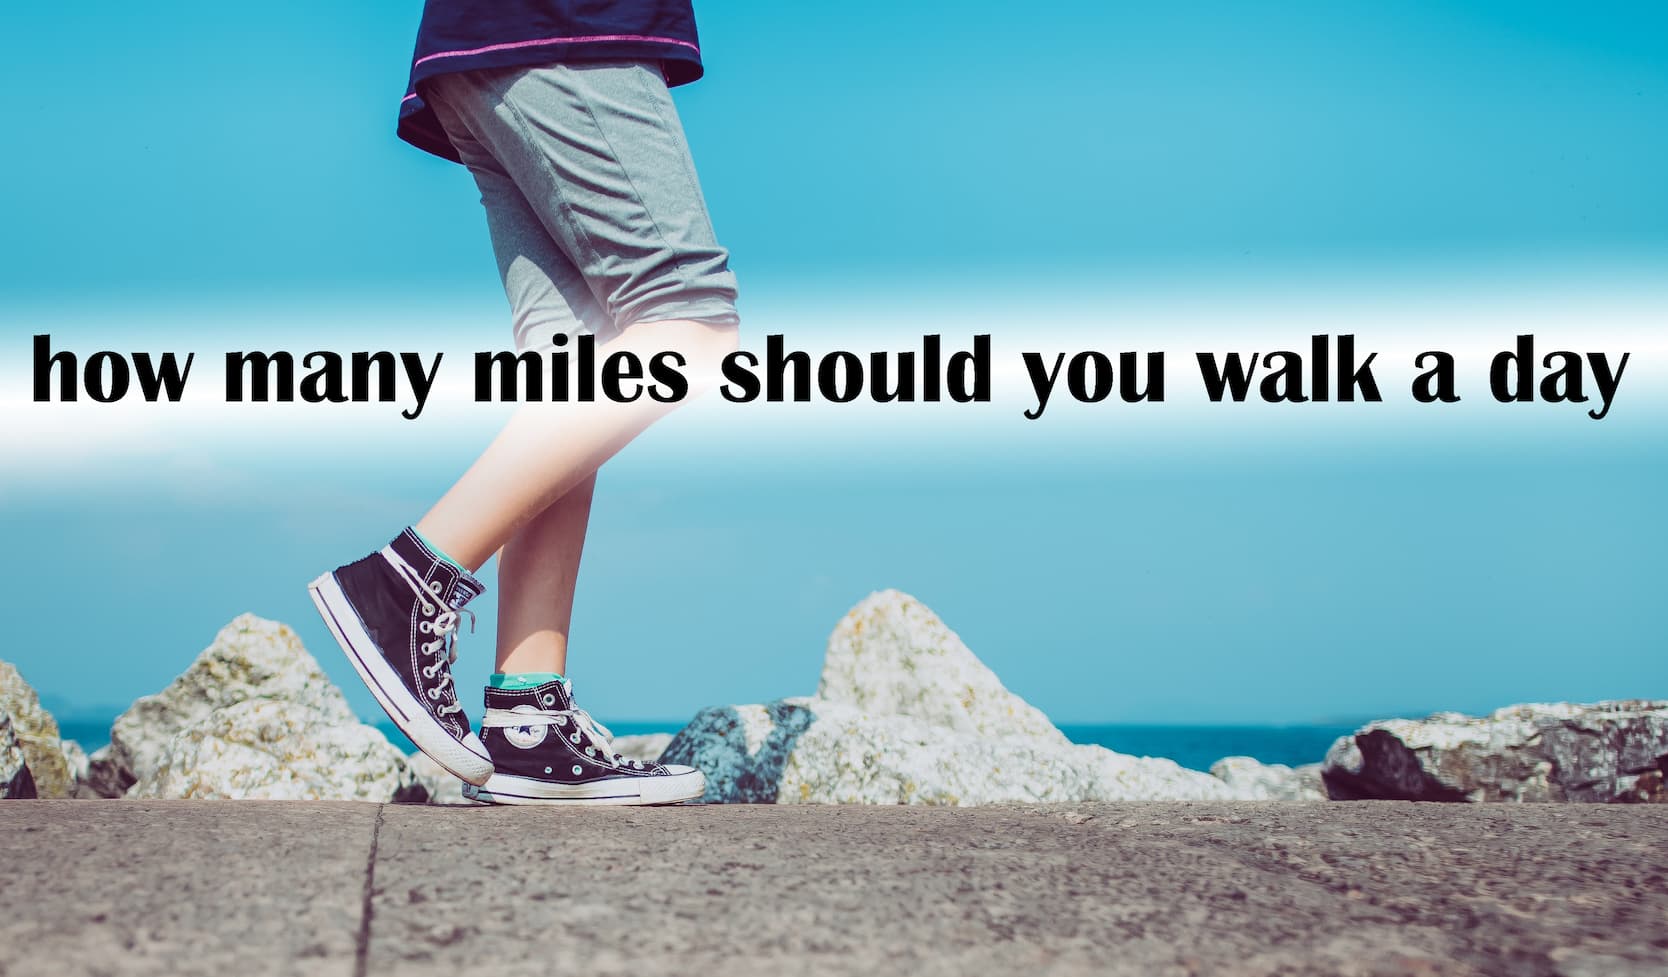 when was walking invented . when was walking invented . how long does it take to walk 5 miles